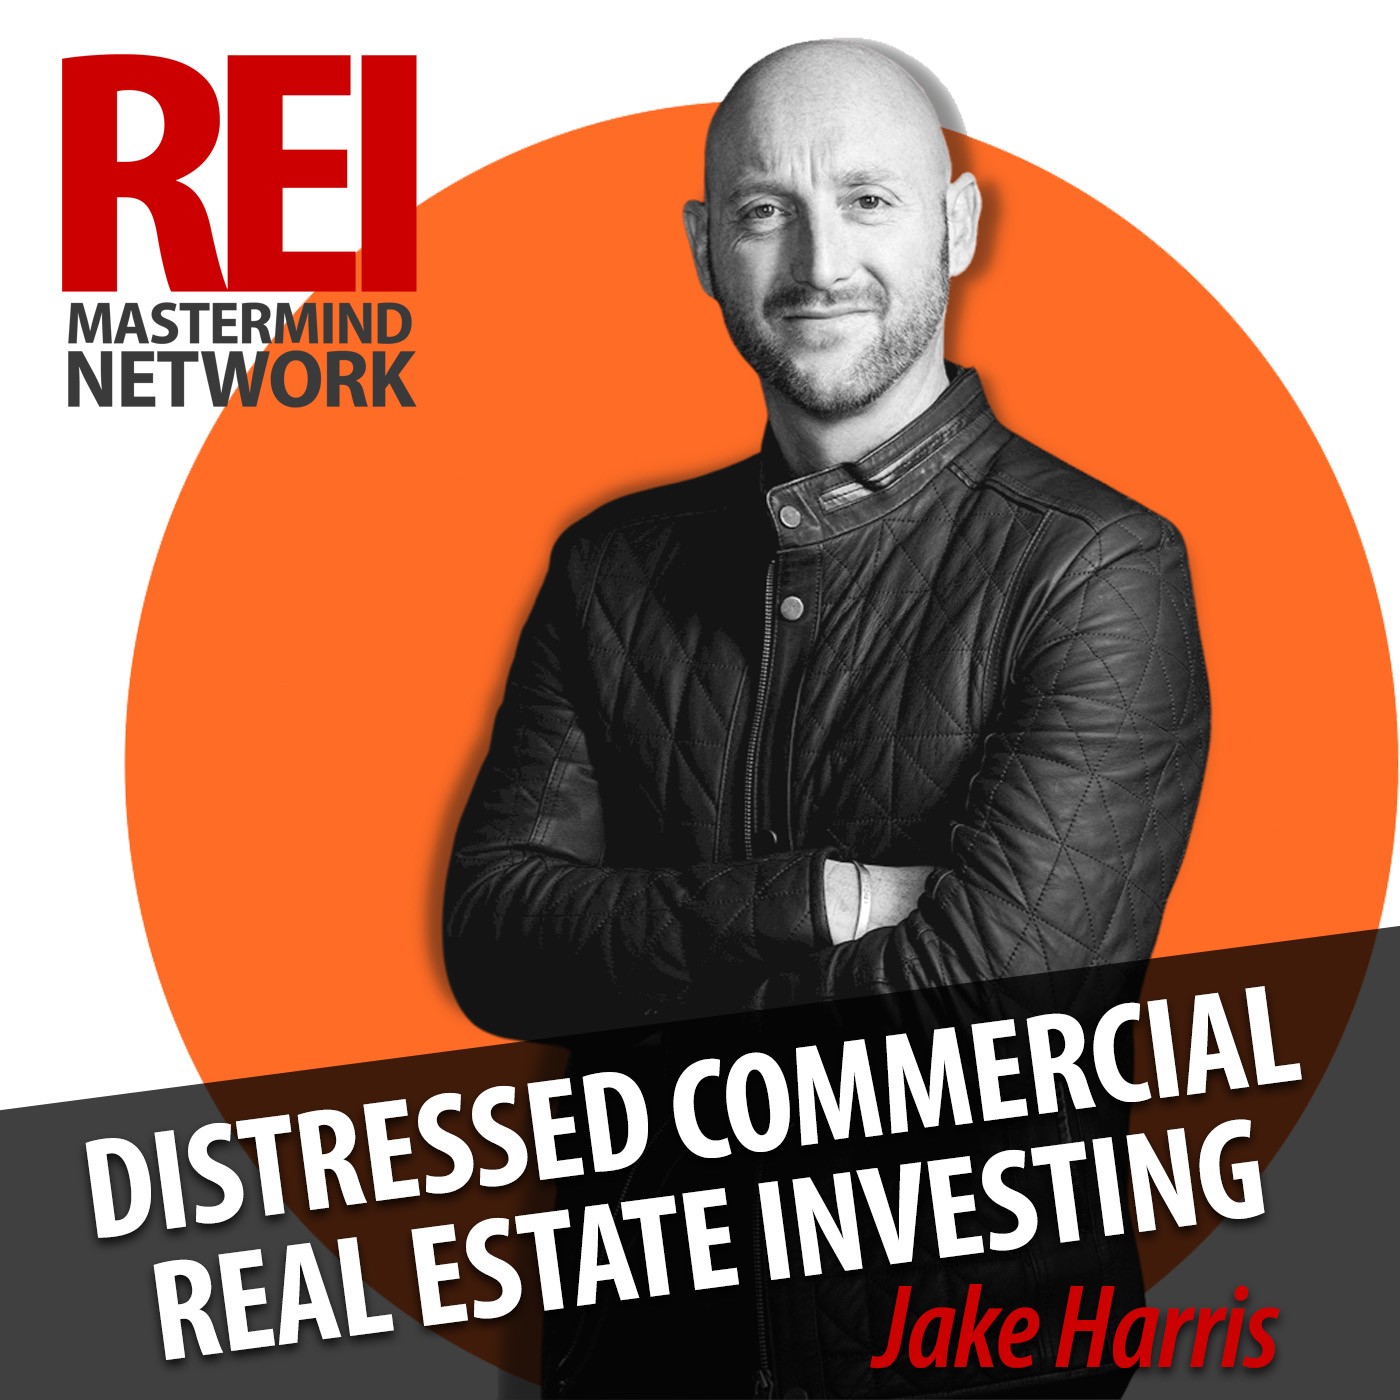 Distressed Commercial Real Estate Investing with Jake Harris